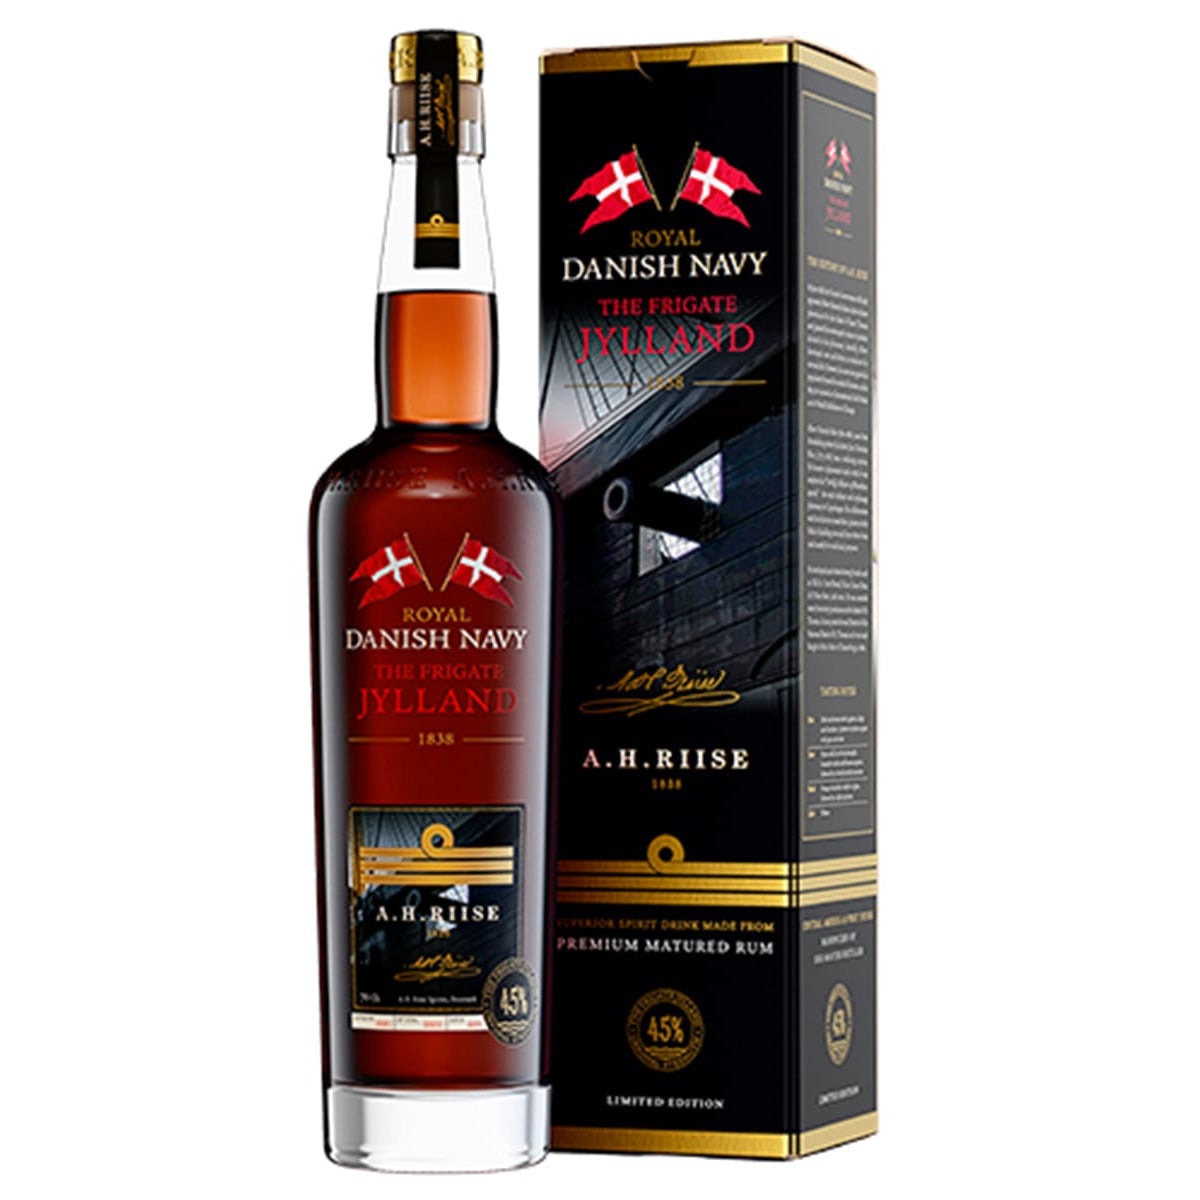 A.H. Riise Royal DANISH NAVY The Frigate JYLLAND Superior Spirit Drink 45% Vol. 0,7l in Giftbox